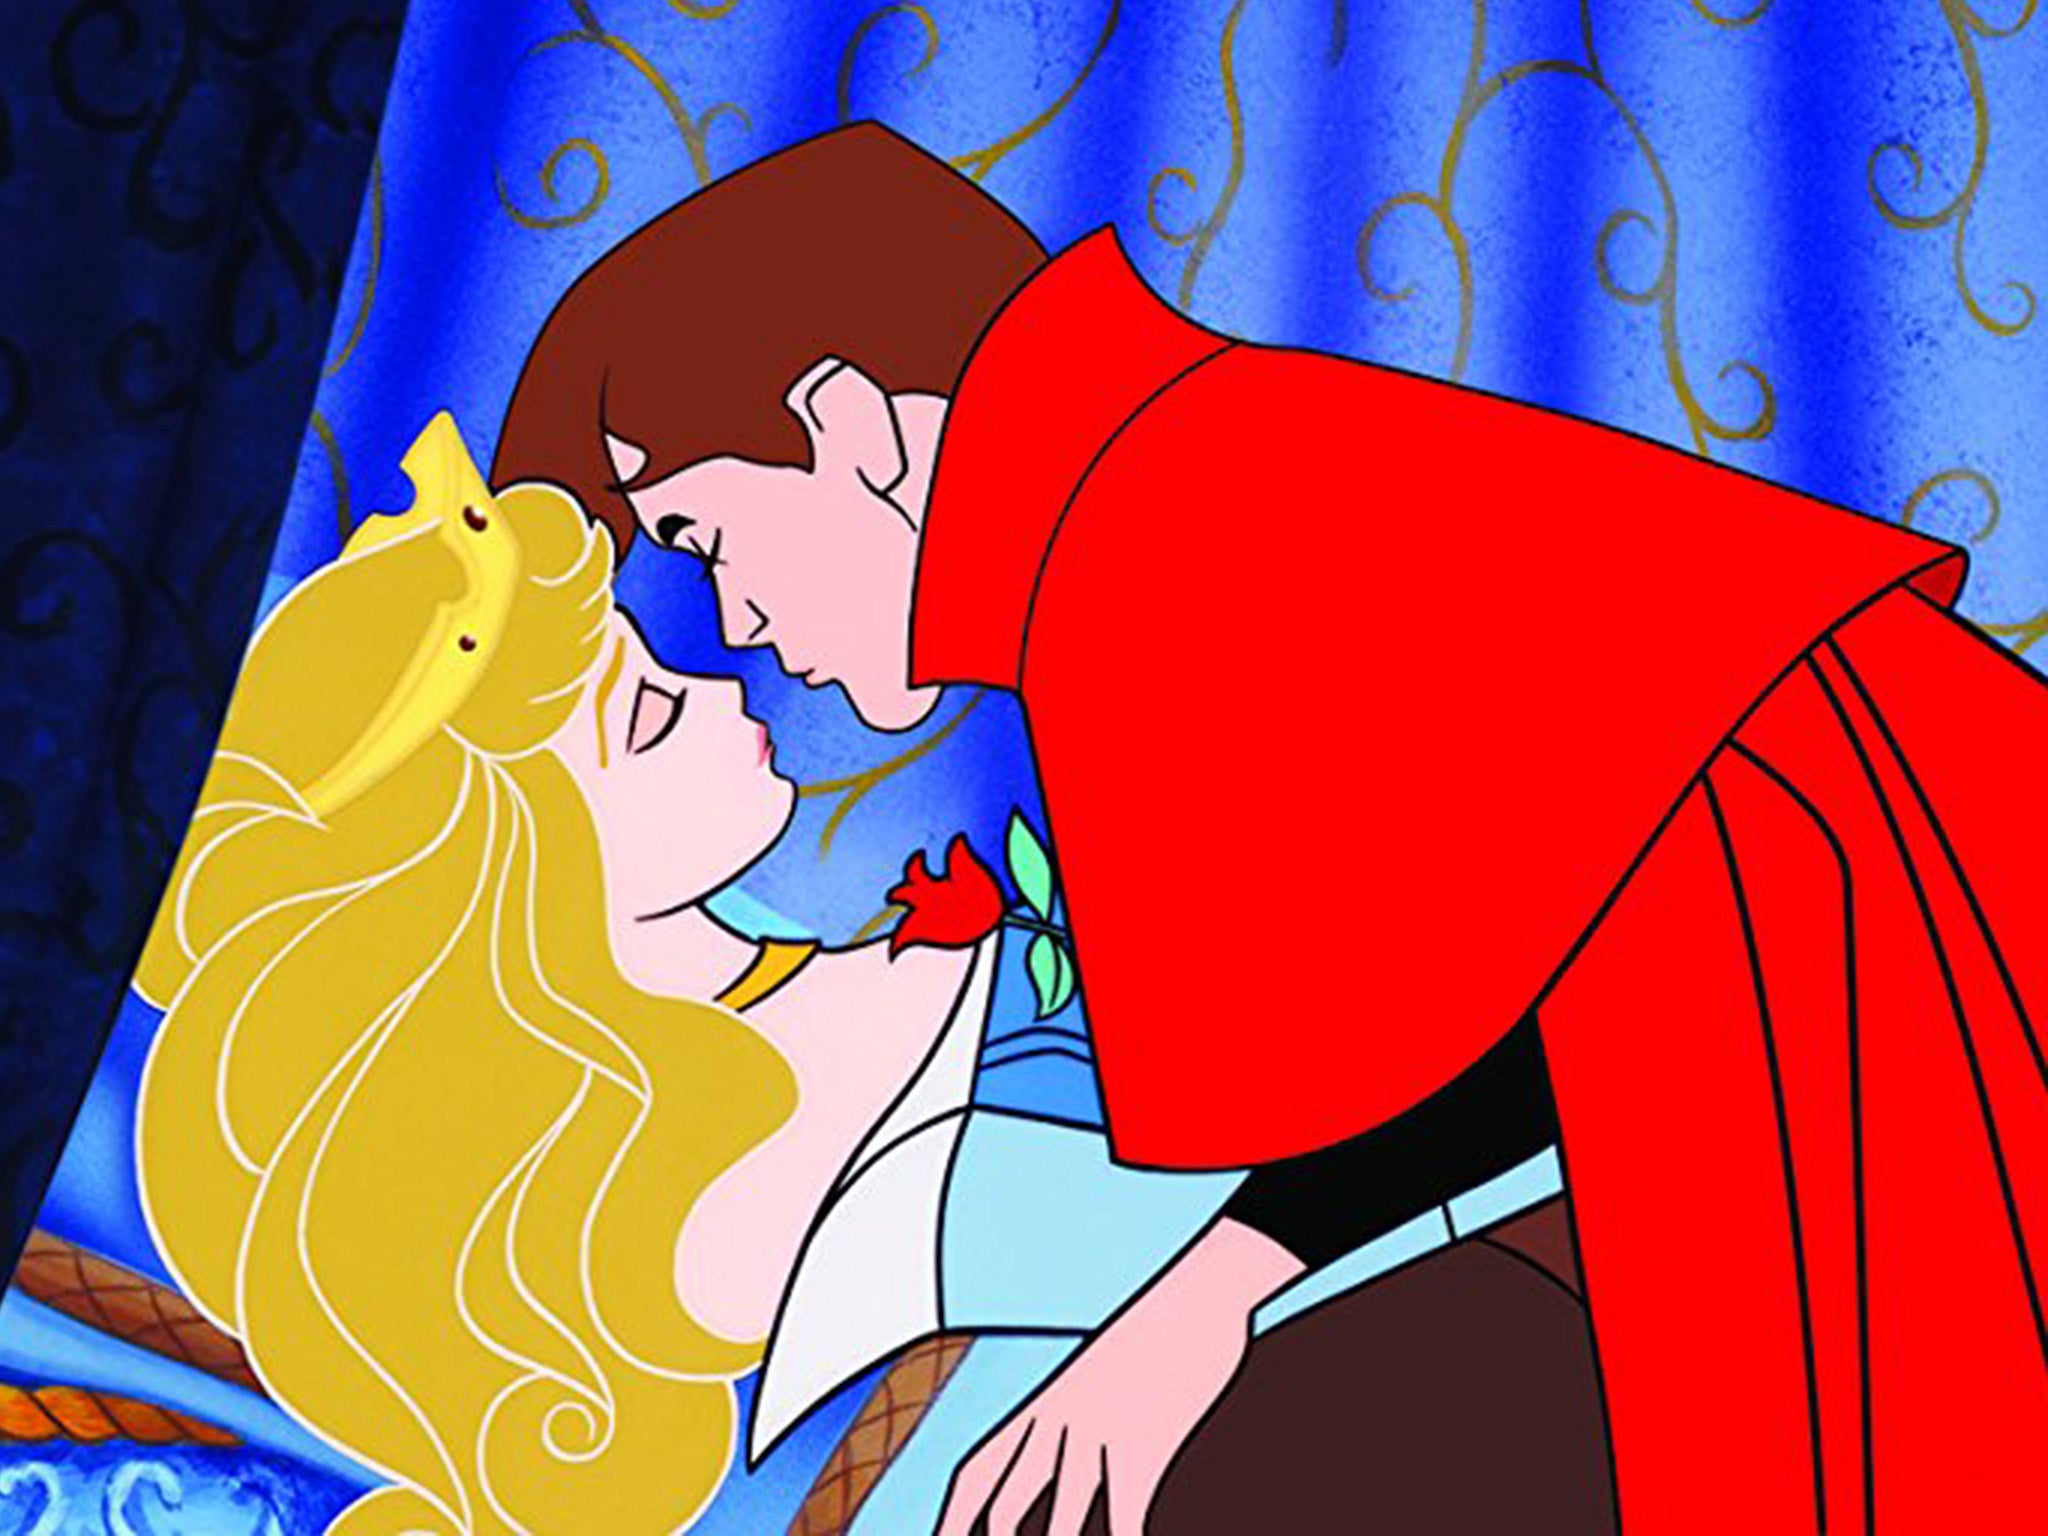 Violent Cartoon Sex Disney - Fairytale princes in Snow White and Sleeping Beauty are sex offenders,  professor claims | The Independent | The Independent